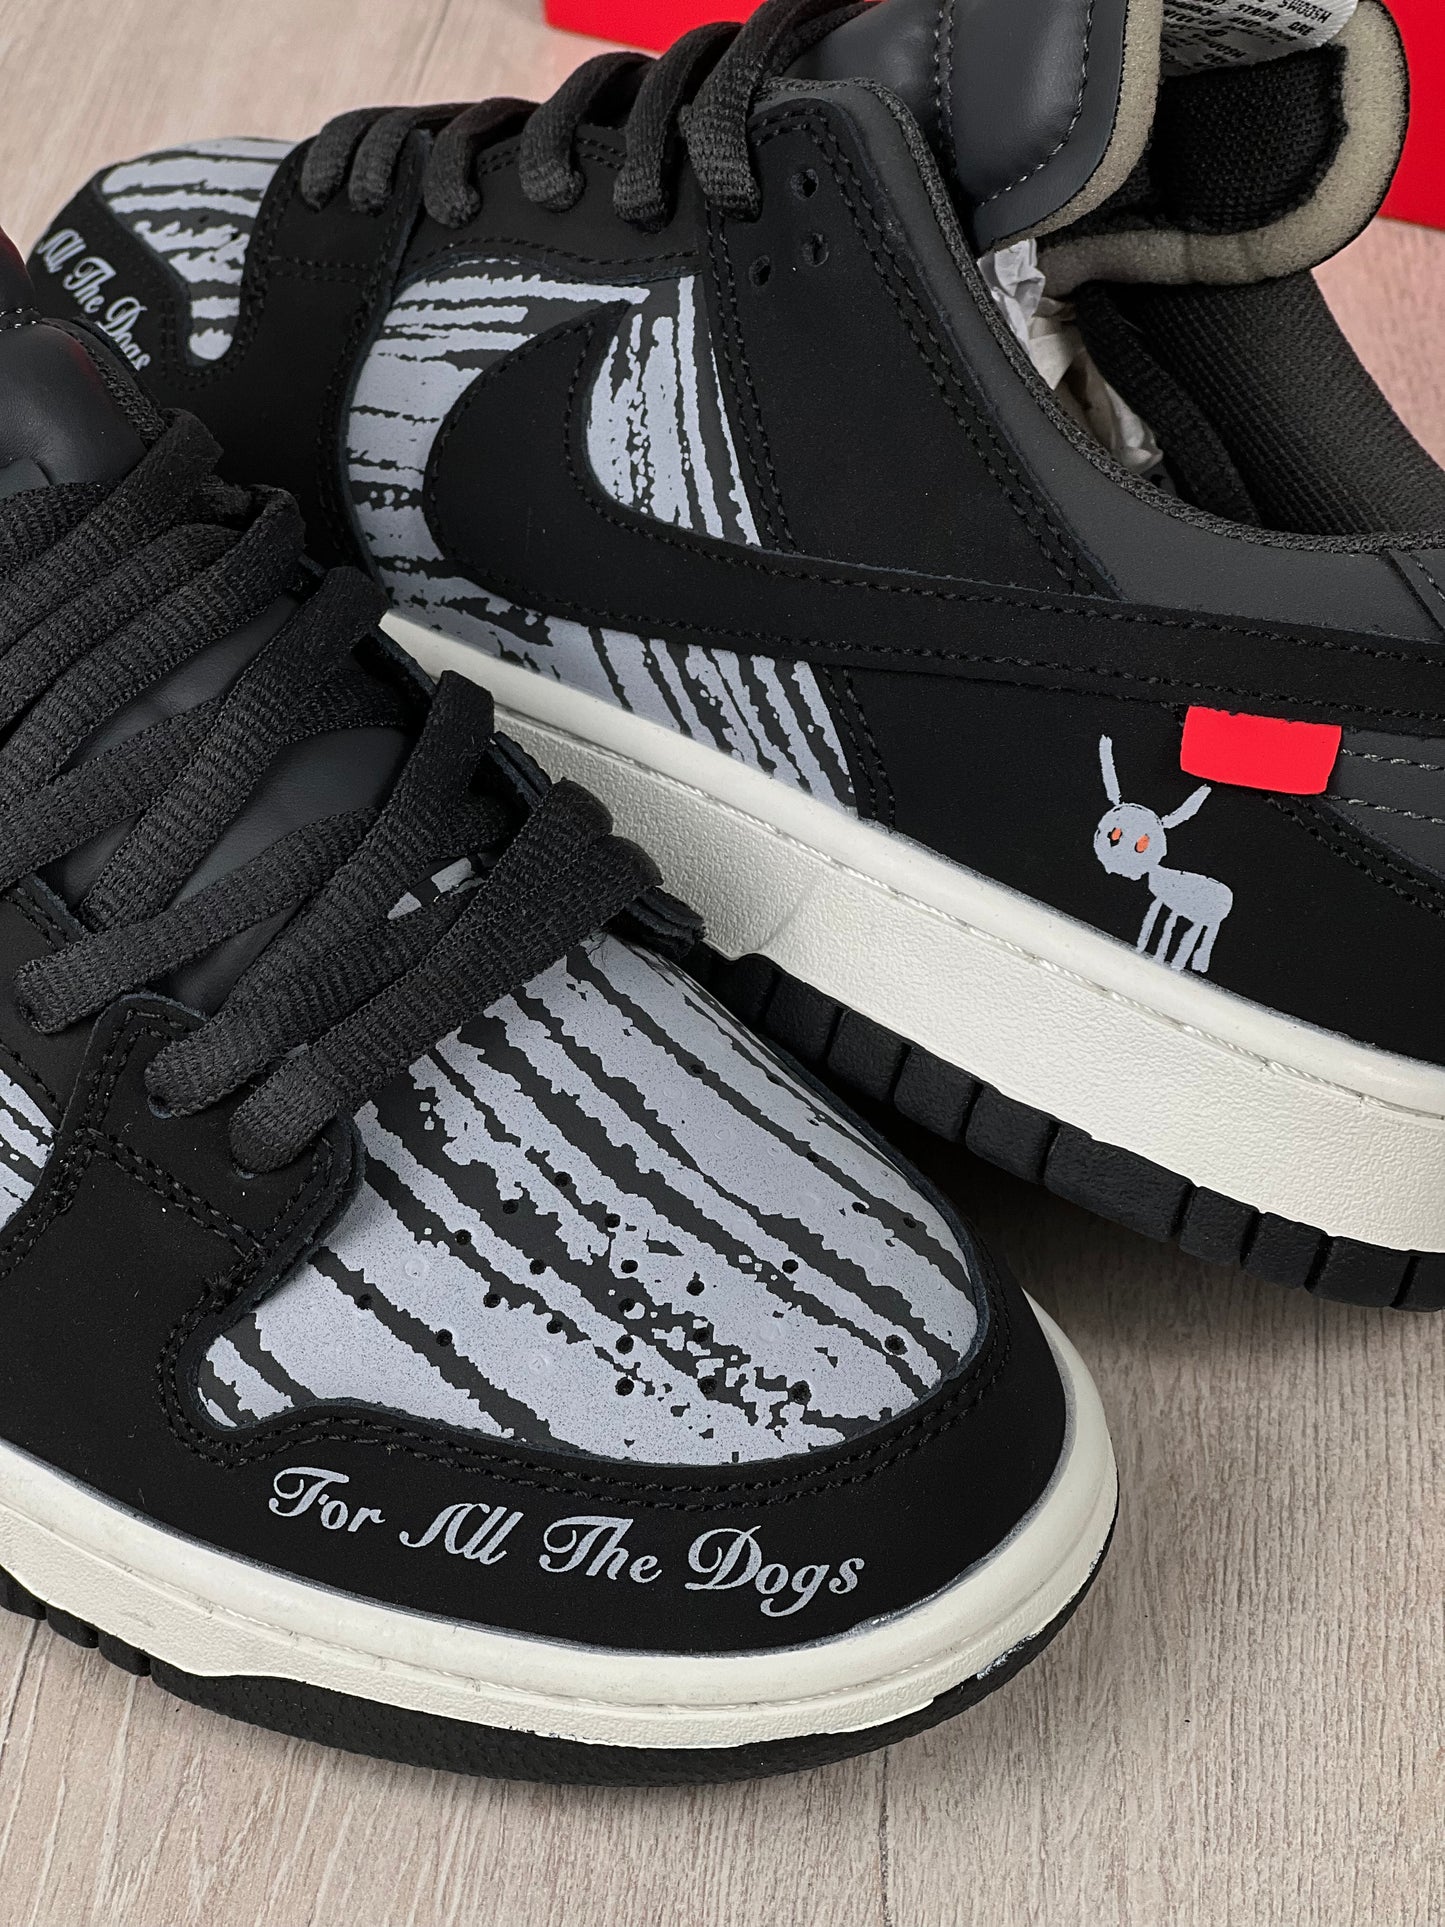 Nike Dunk Low “ For All the Dogs”